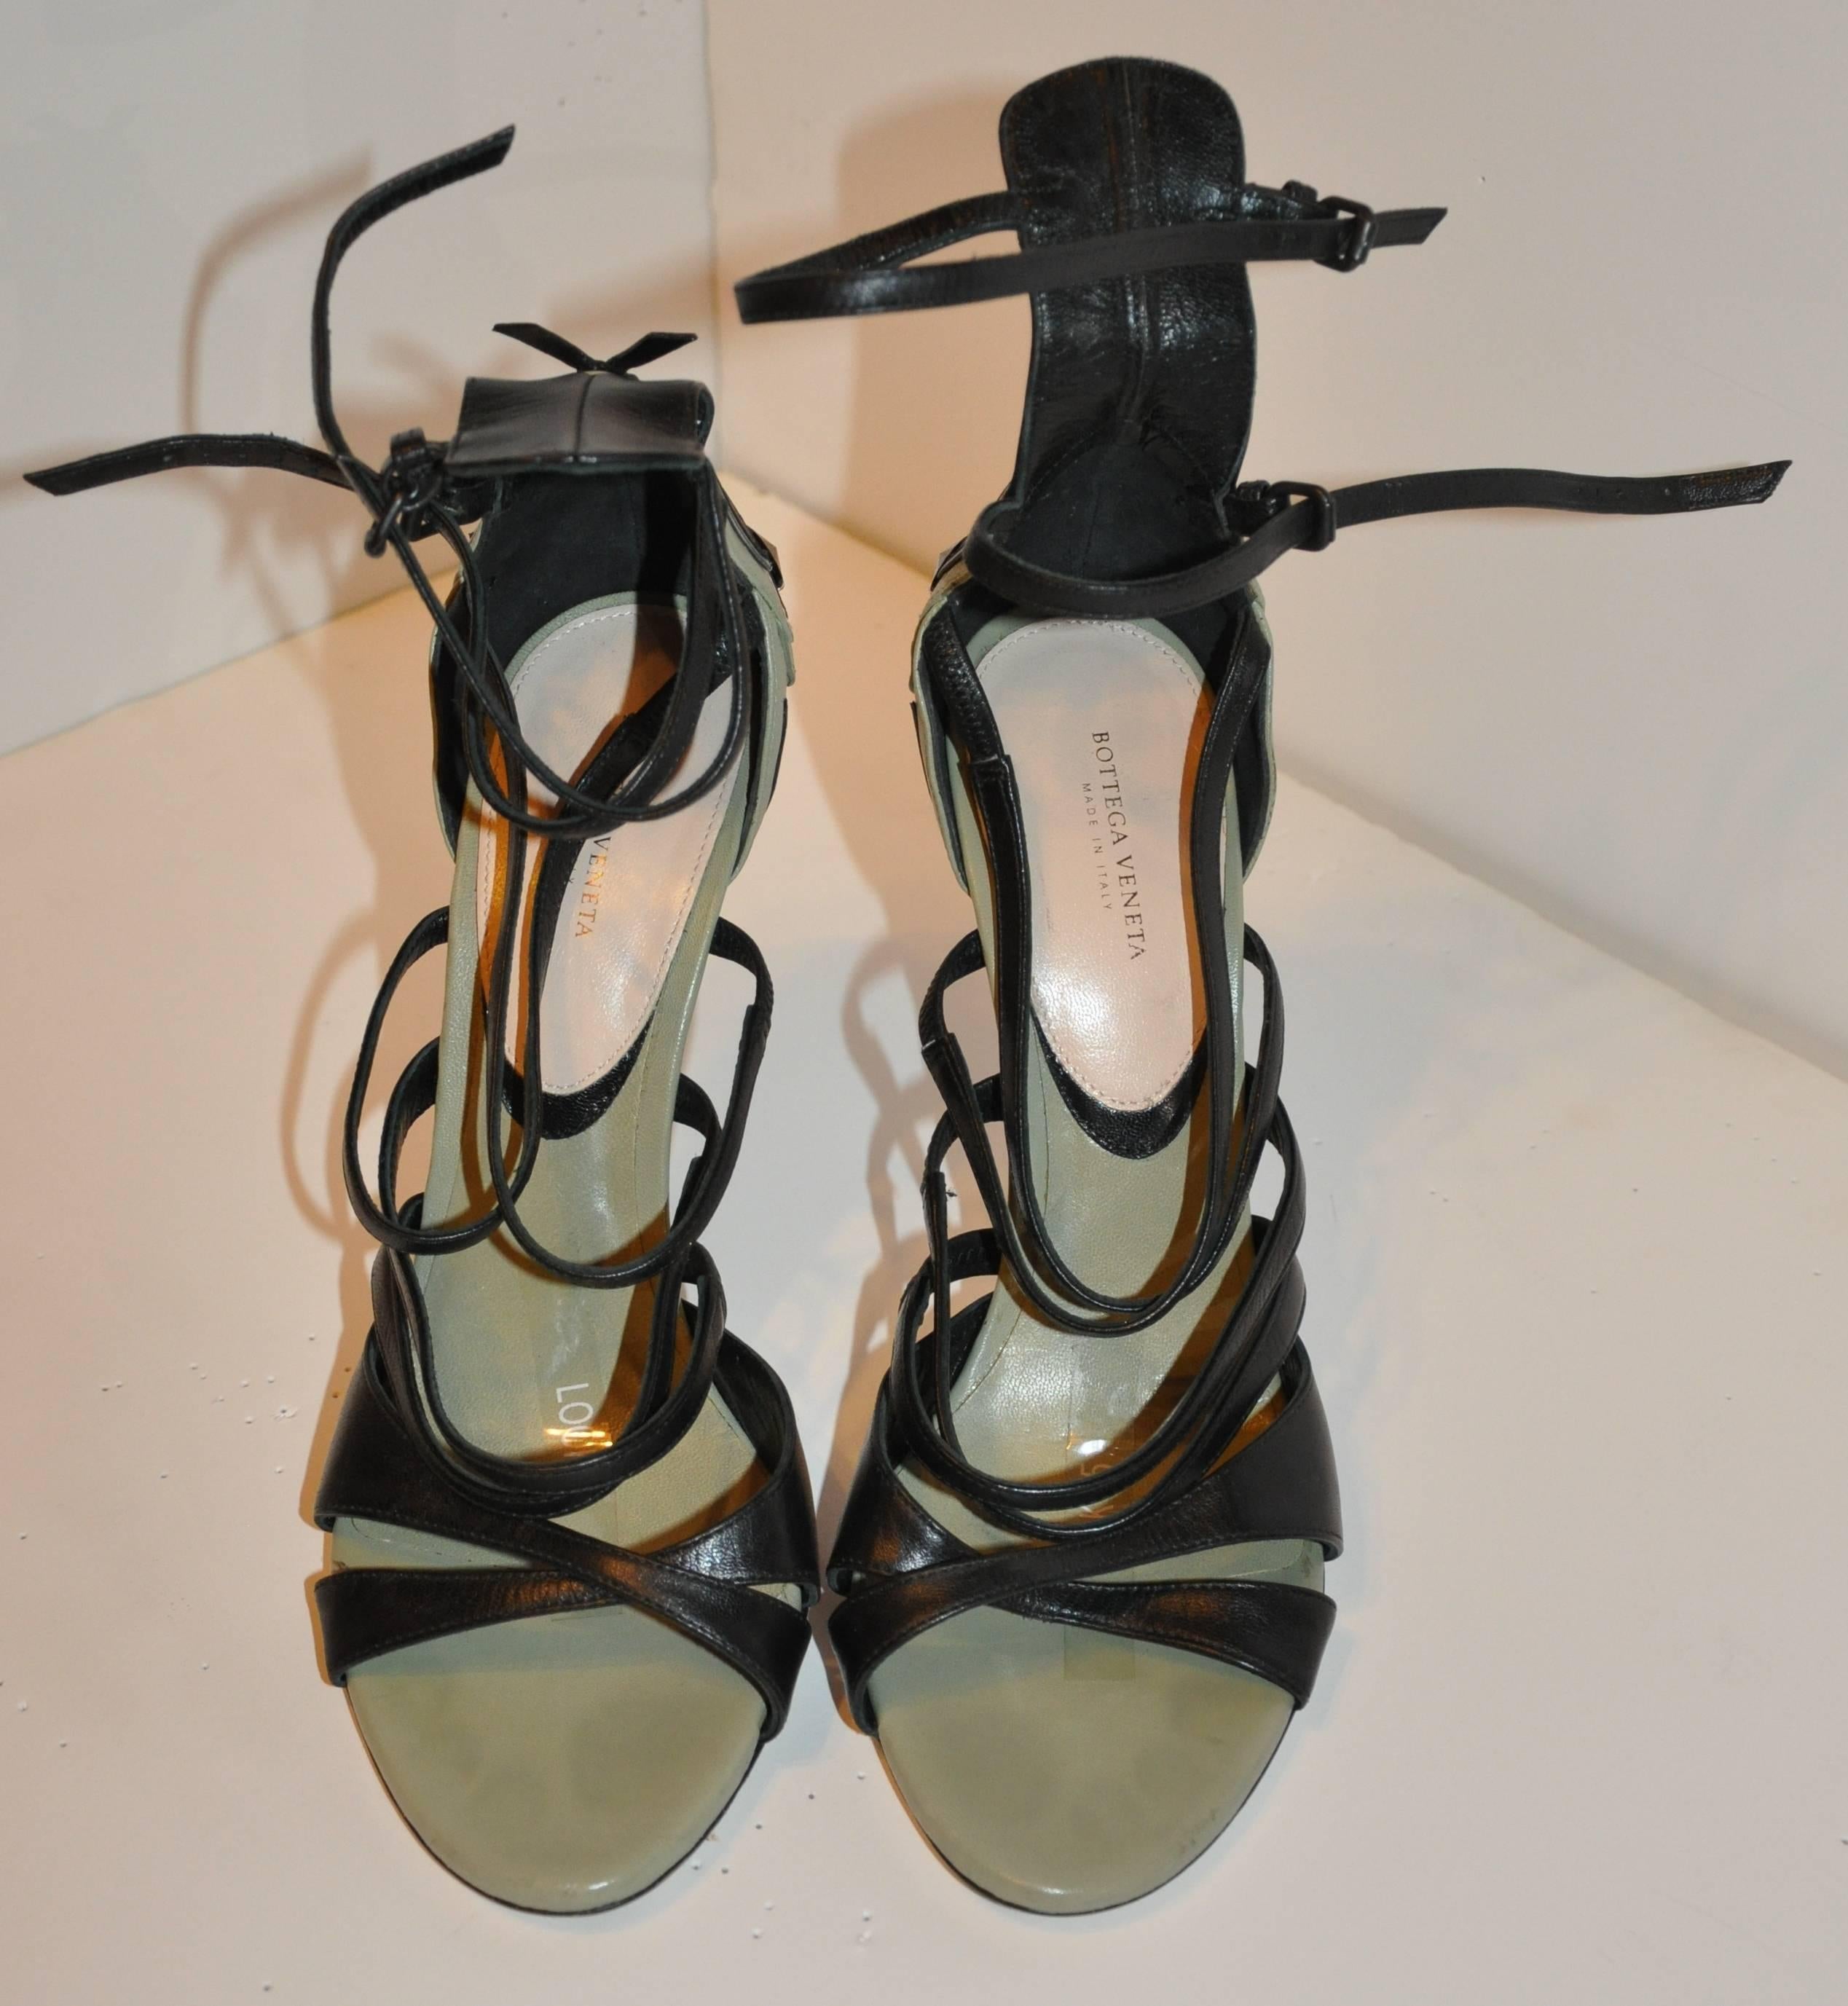        These wonderfully wicked yet elegant Bottega Veneta "Limited Edition" olive and black calfskin strappy ankle-strap heels are accented with metallic silver calfskin on the back of the heel as well as two polished black rhinestones